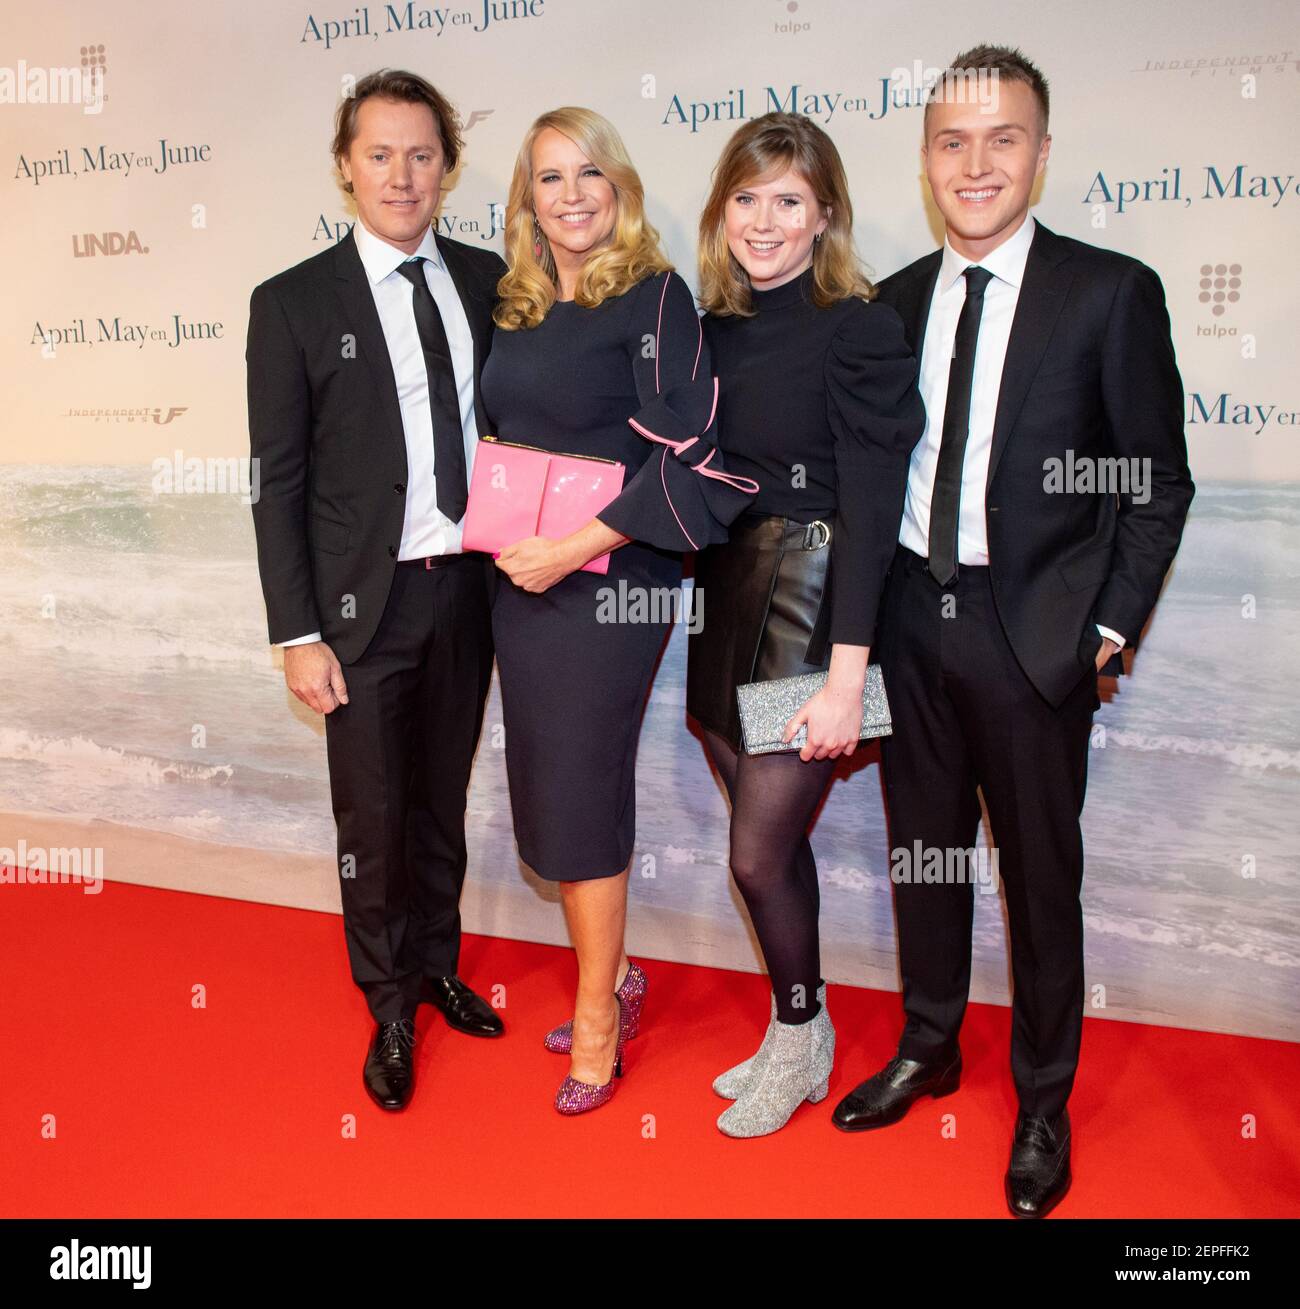 Linda De Mol And Her Partner Jeroen Rietbergen And Her Son Julian Vahle And  Daughter Noa Vahle On The April, May And June Premiere At The Delamar  Theater In Amsterdam, The Netherlands.